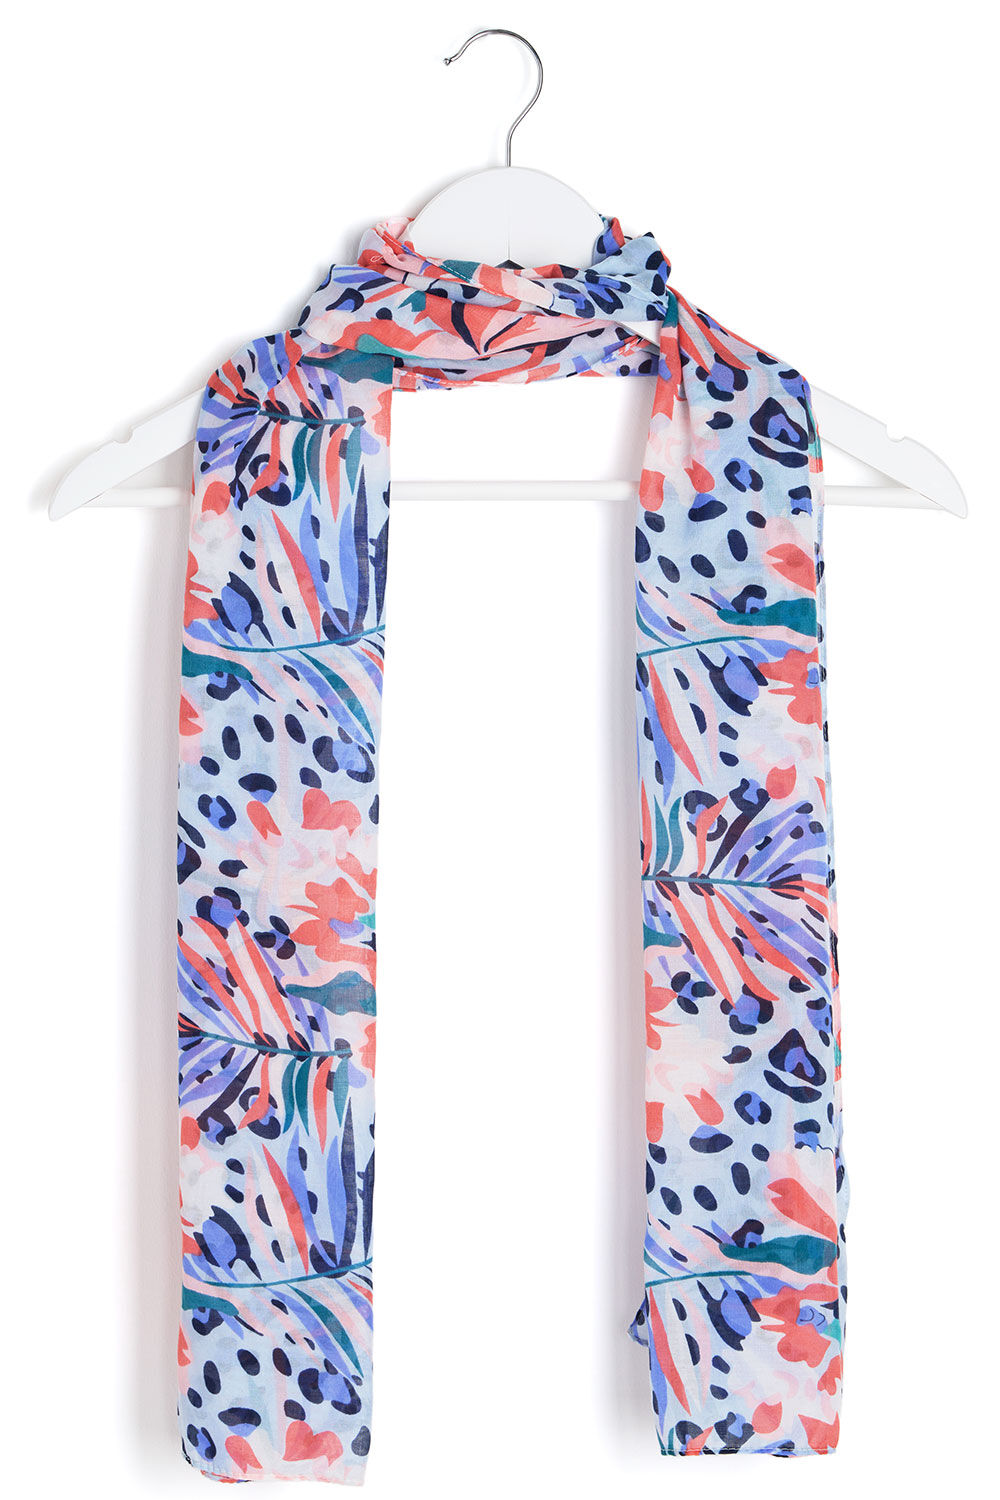 Bonmarche Pink Floral and Animal Print Lightweight Scarf, Size: One Size